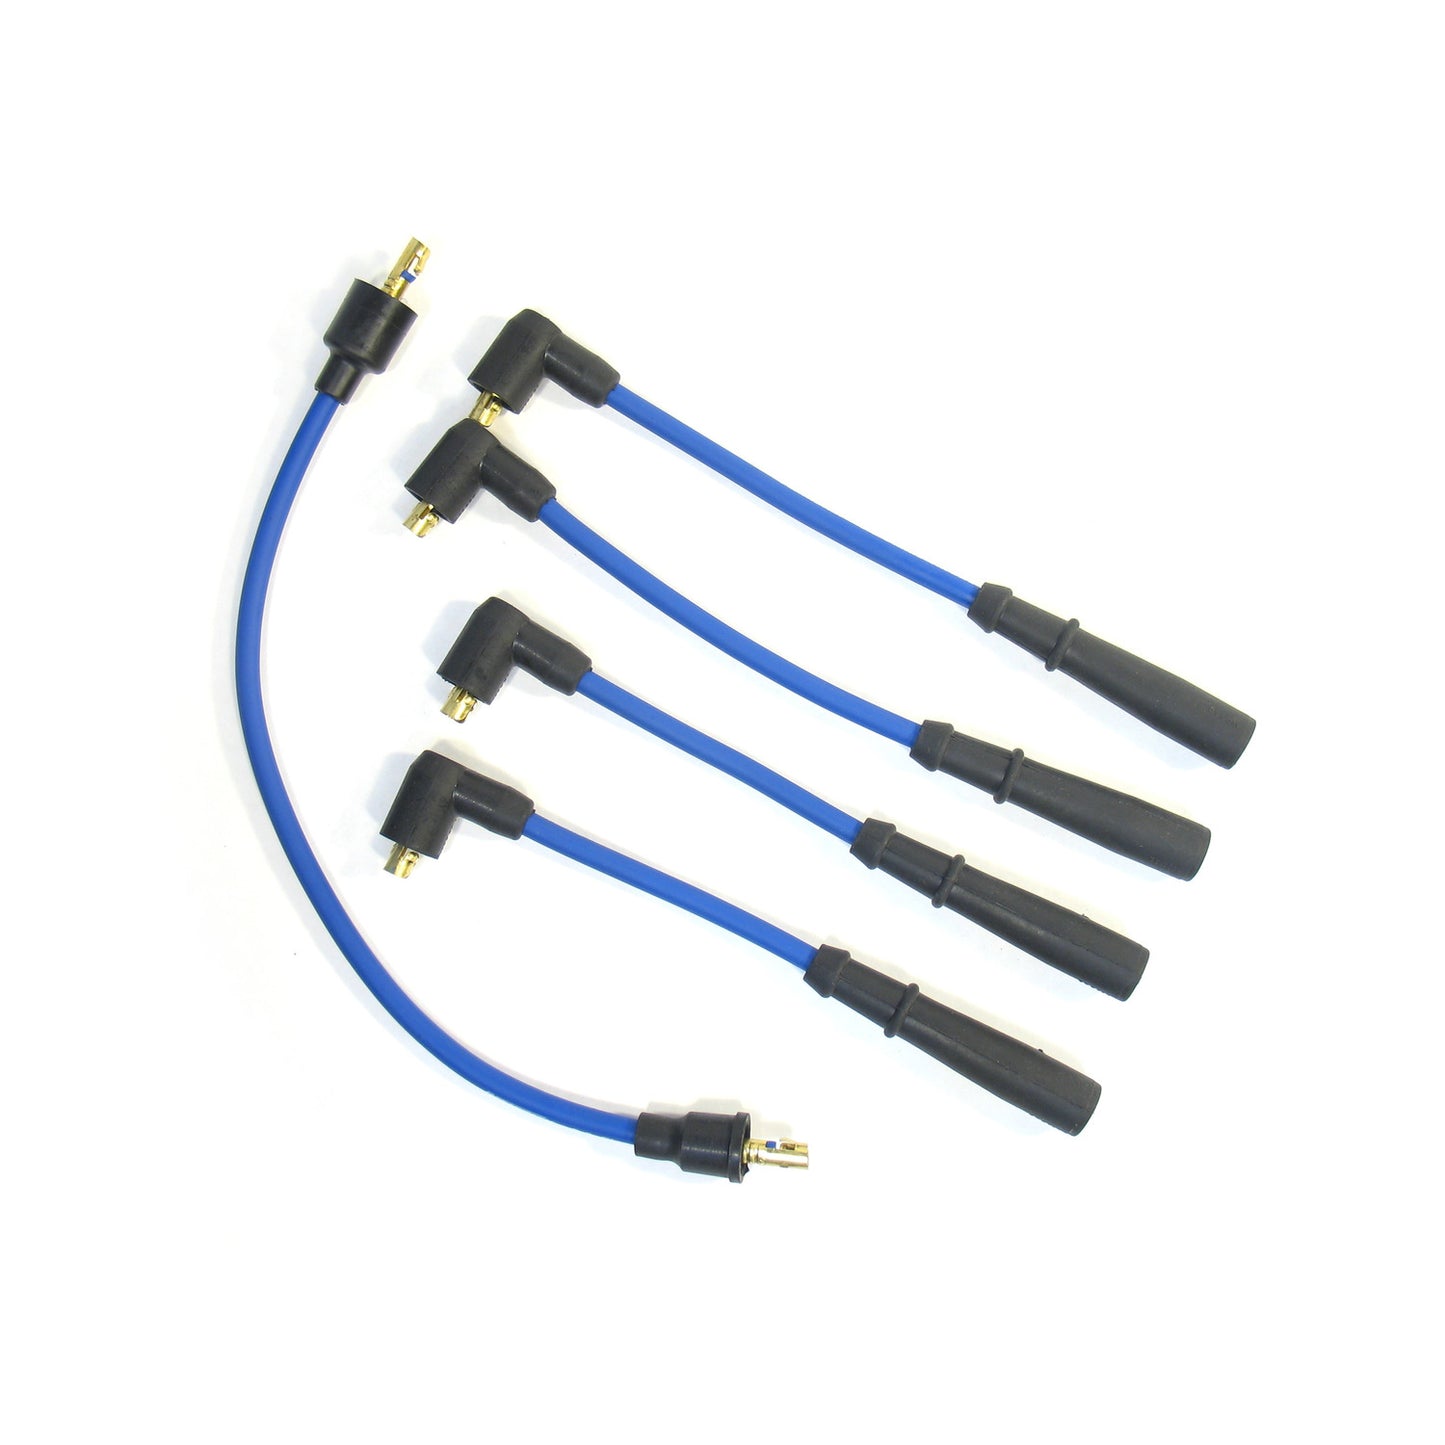 PerTronix 804311 Flame-Thrower Spark Plug Wires 4 cyl 8mm Triumph Type#2 Blue